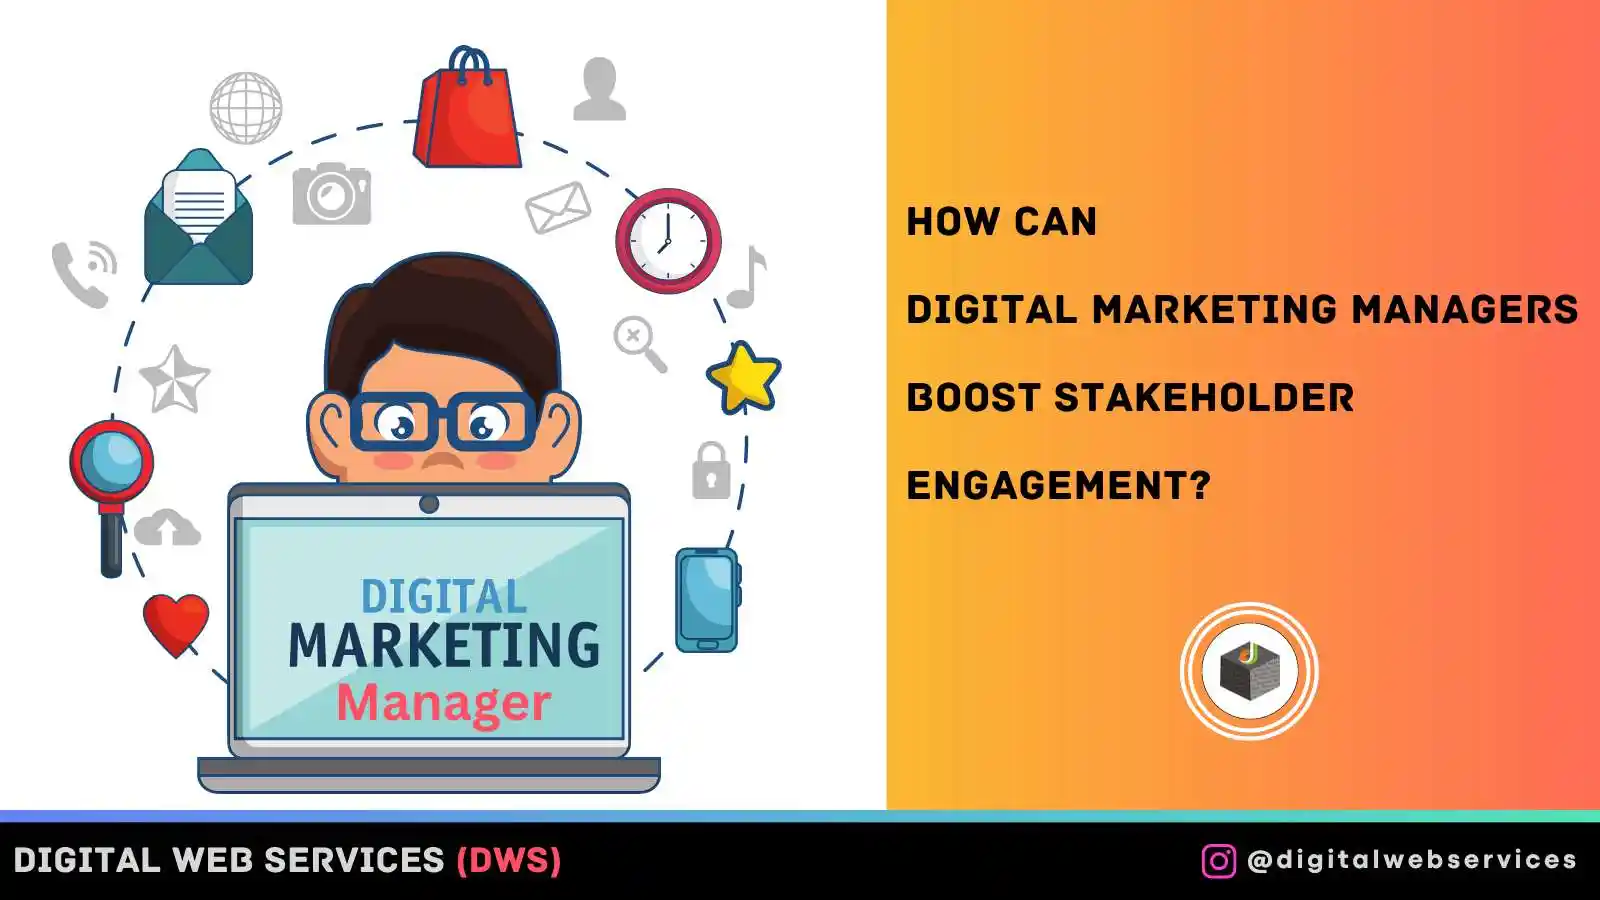 How Can Digital Marketing Managers Boost Stakeholder Engagement